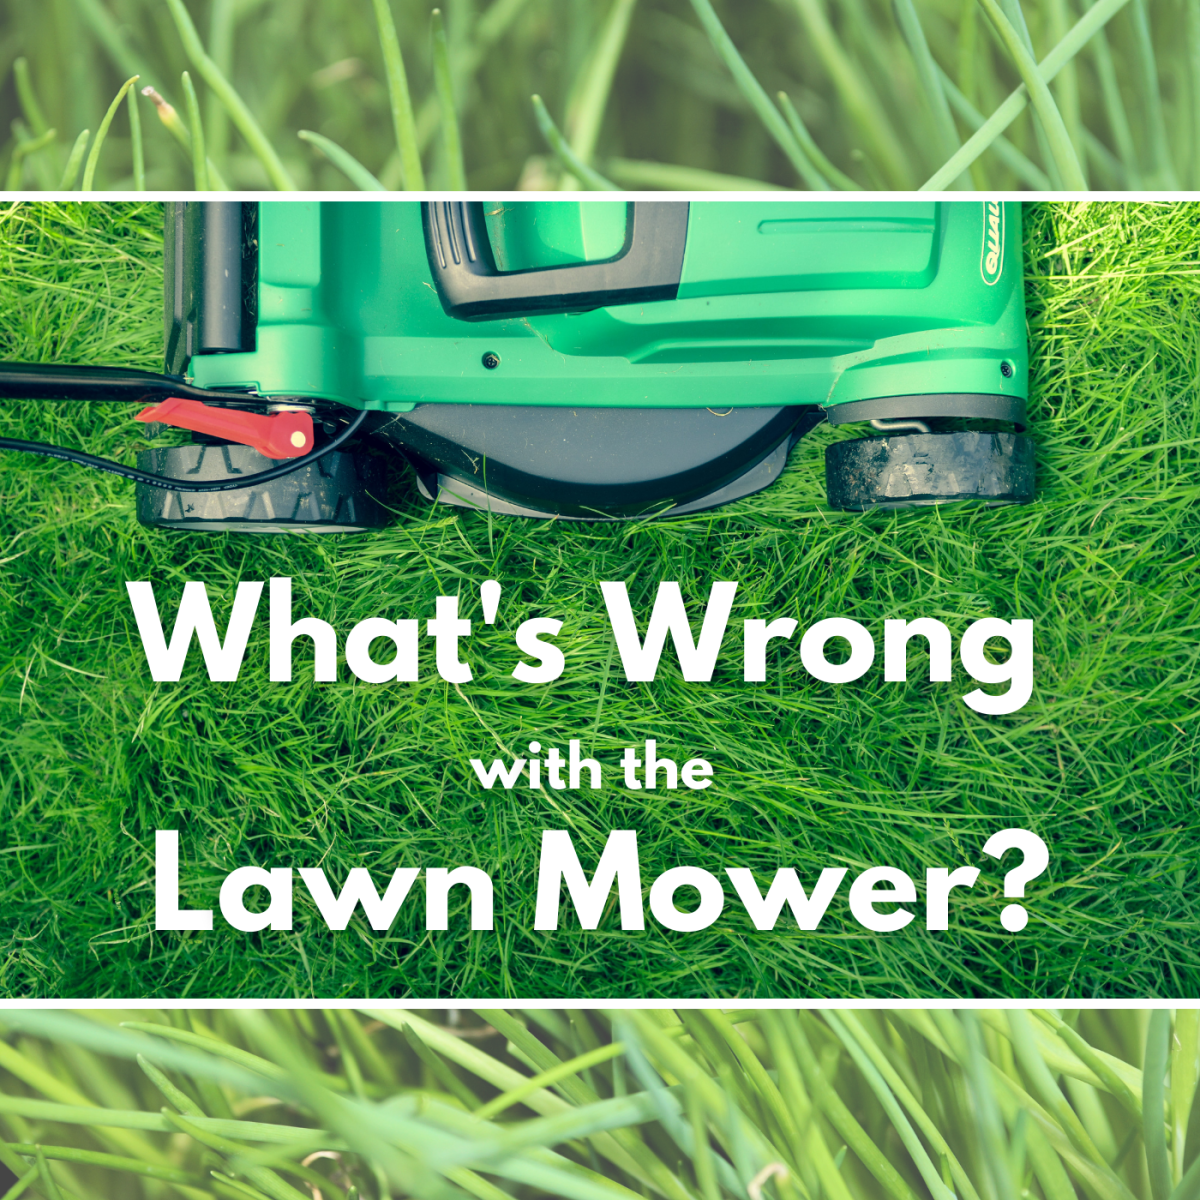 This guide will help you figure out what's wrong with your lawn mower.